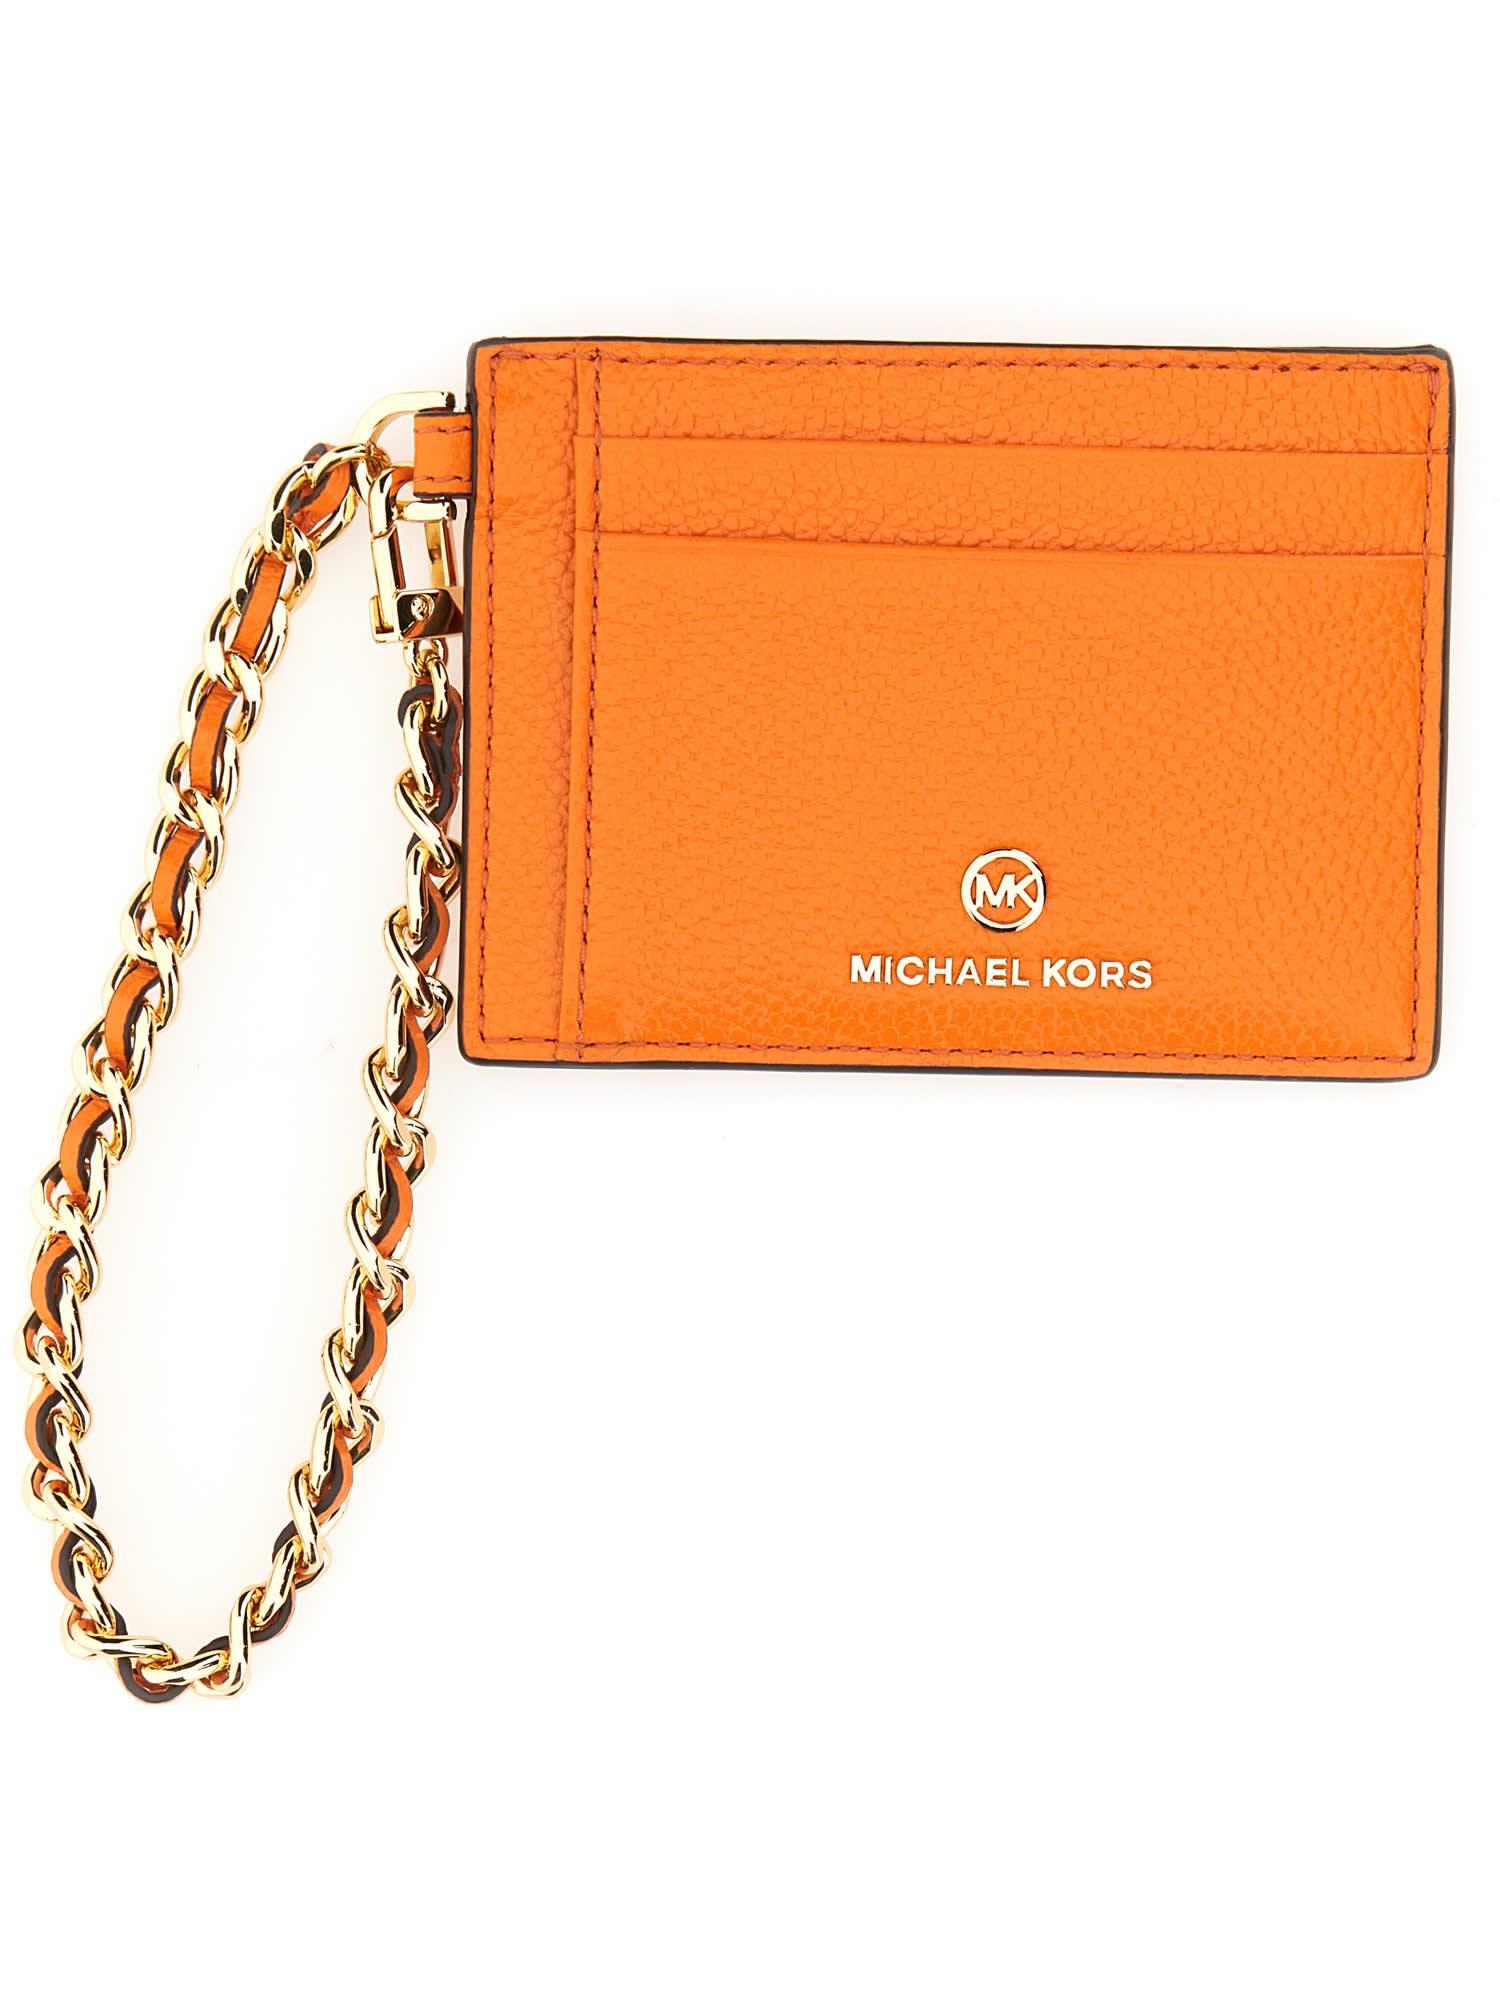 Michael Kors Small Credit Card Holder In Apricot